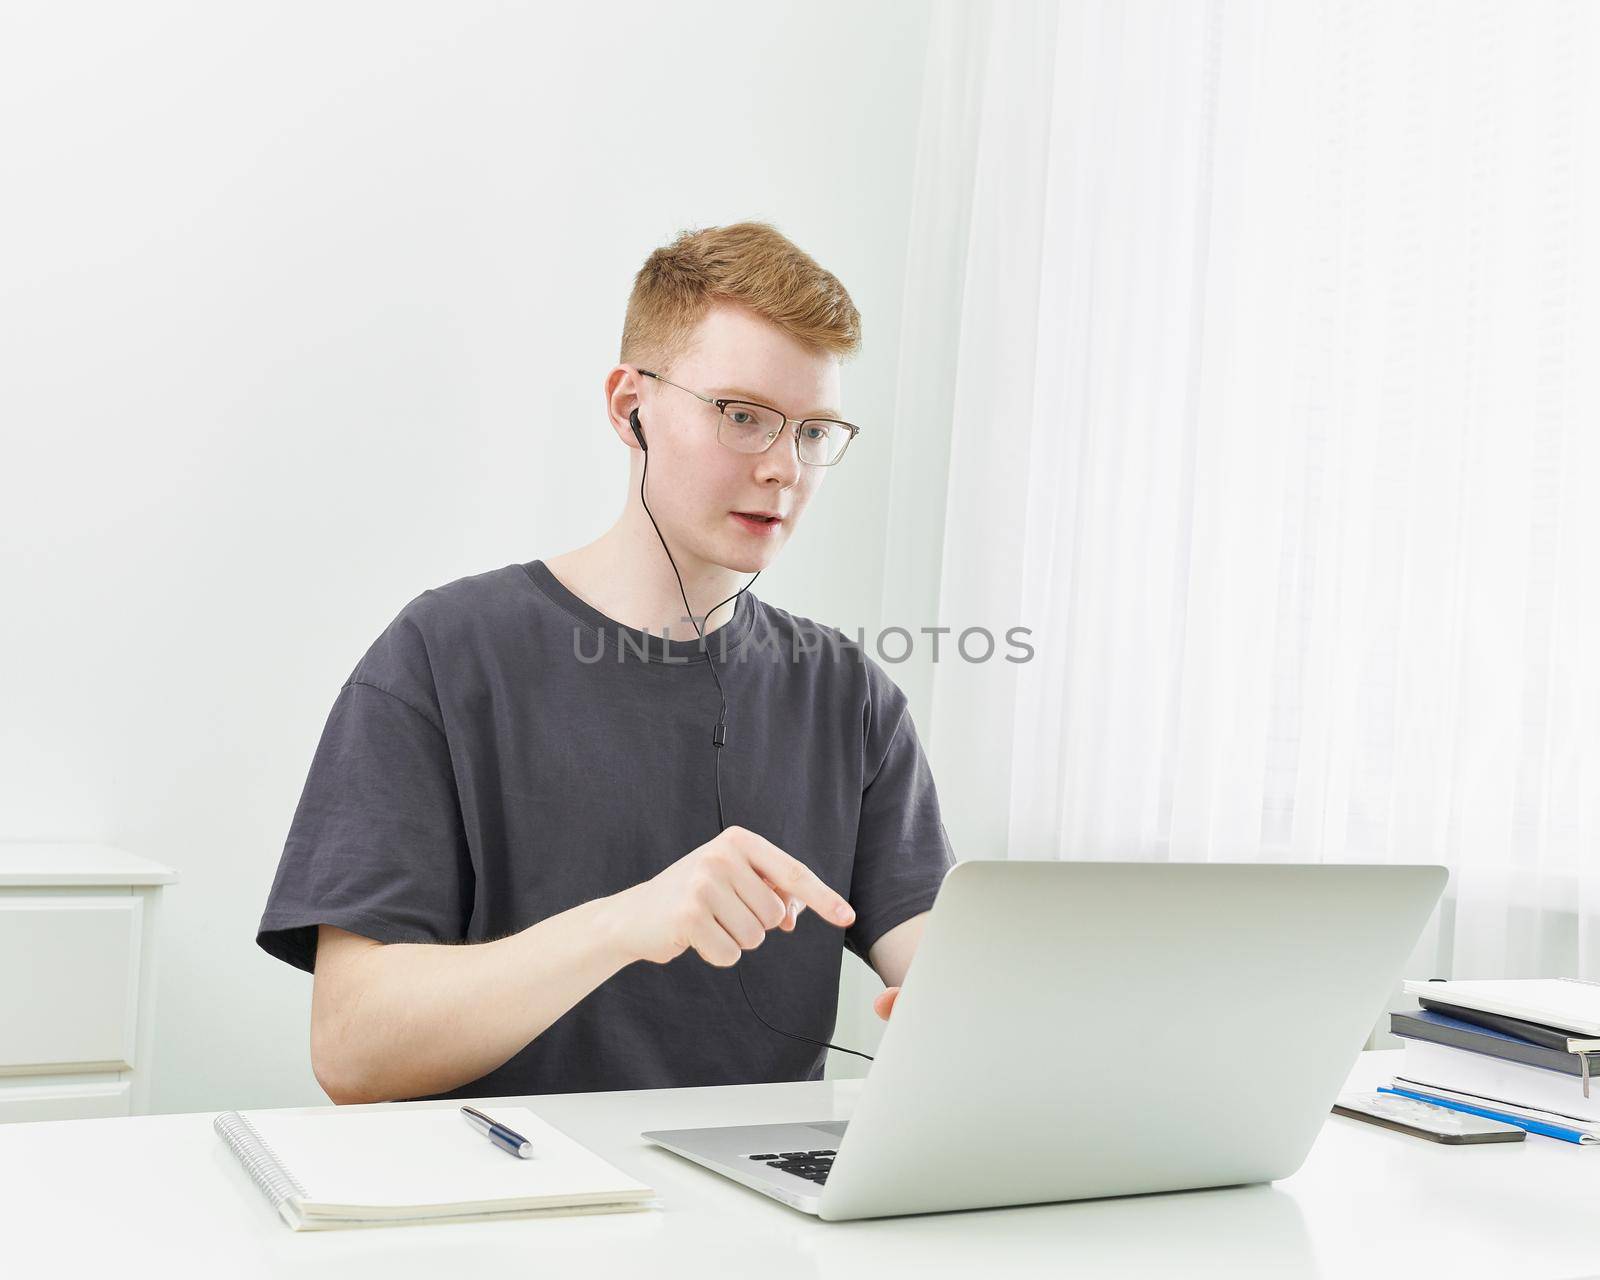 Distance learning or working. Quarantine, self-isolation, social phobia. Young boy speaking on online training, meeting, conference. Man looks at laptop. Freelancer, Concept Of Digital Nomad